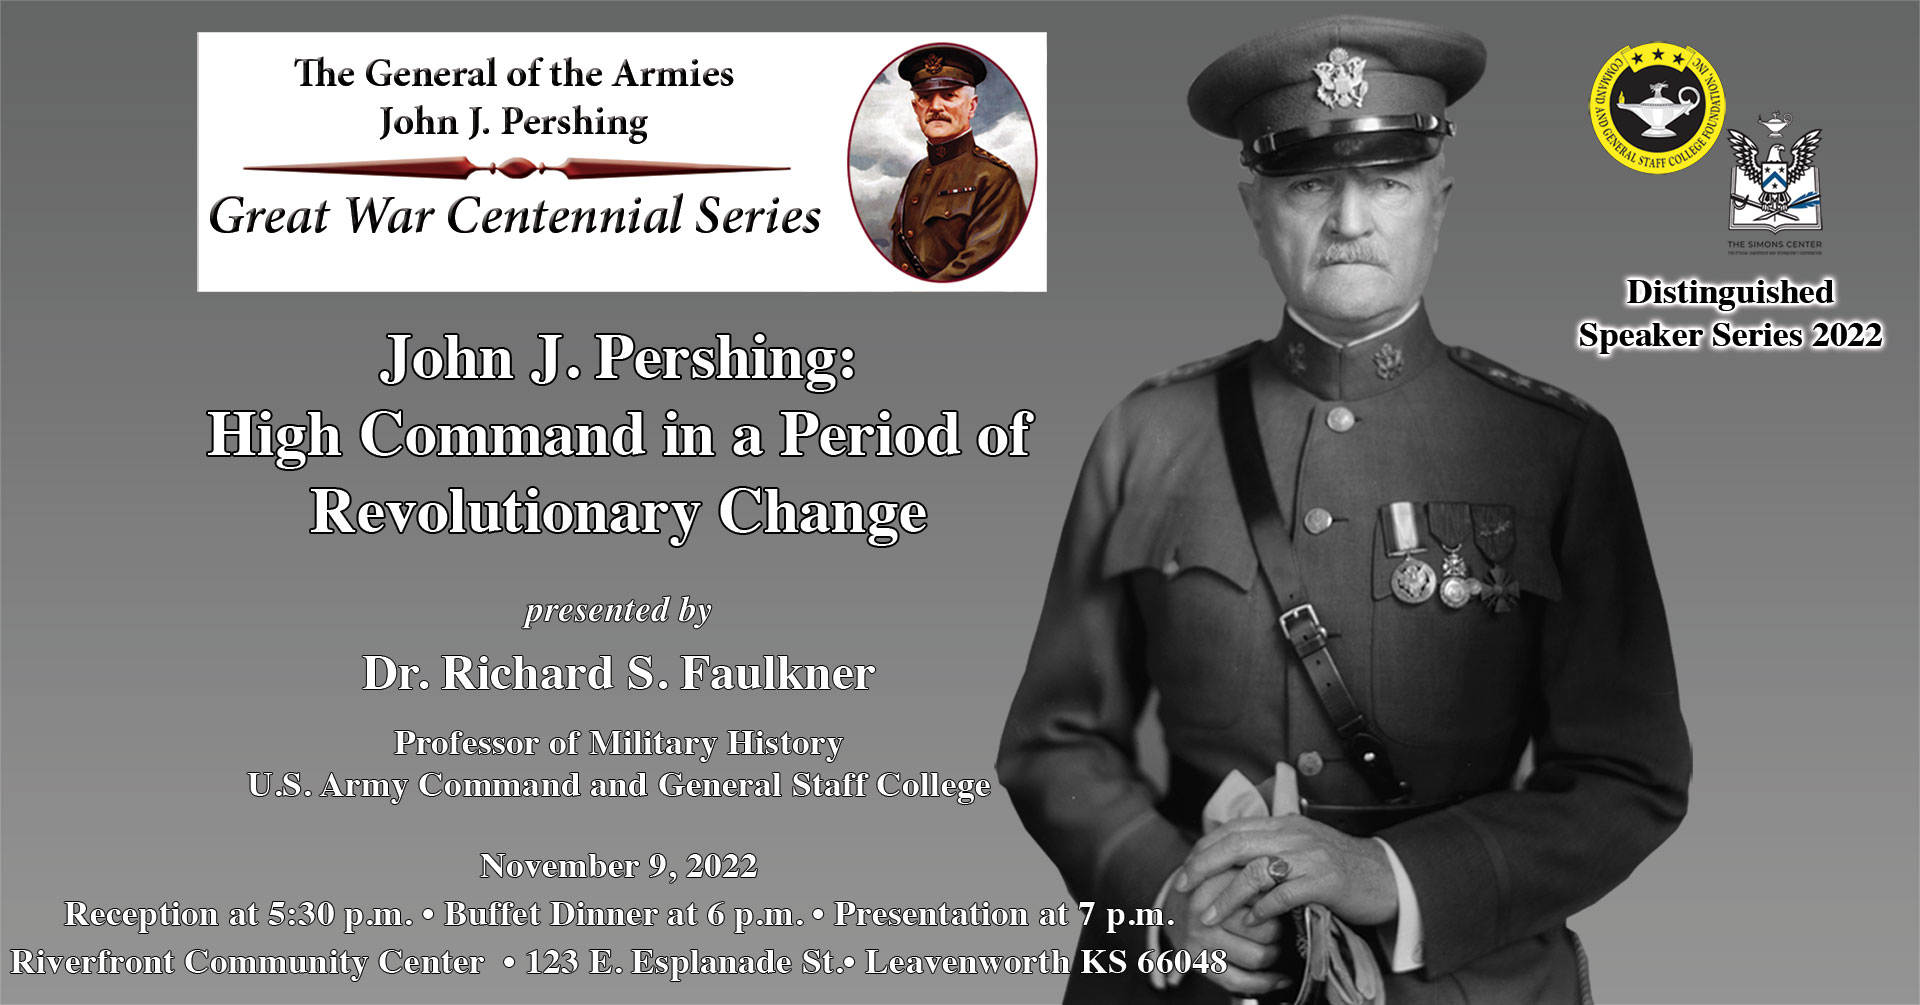 Composite image with photo of Gen. John J. Pershing on the right and text on the left advertising the next lecture in the General of the Armies John J. Pershing Great War Centennial Series.